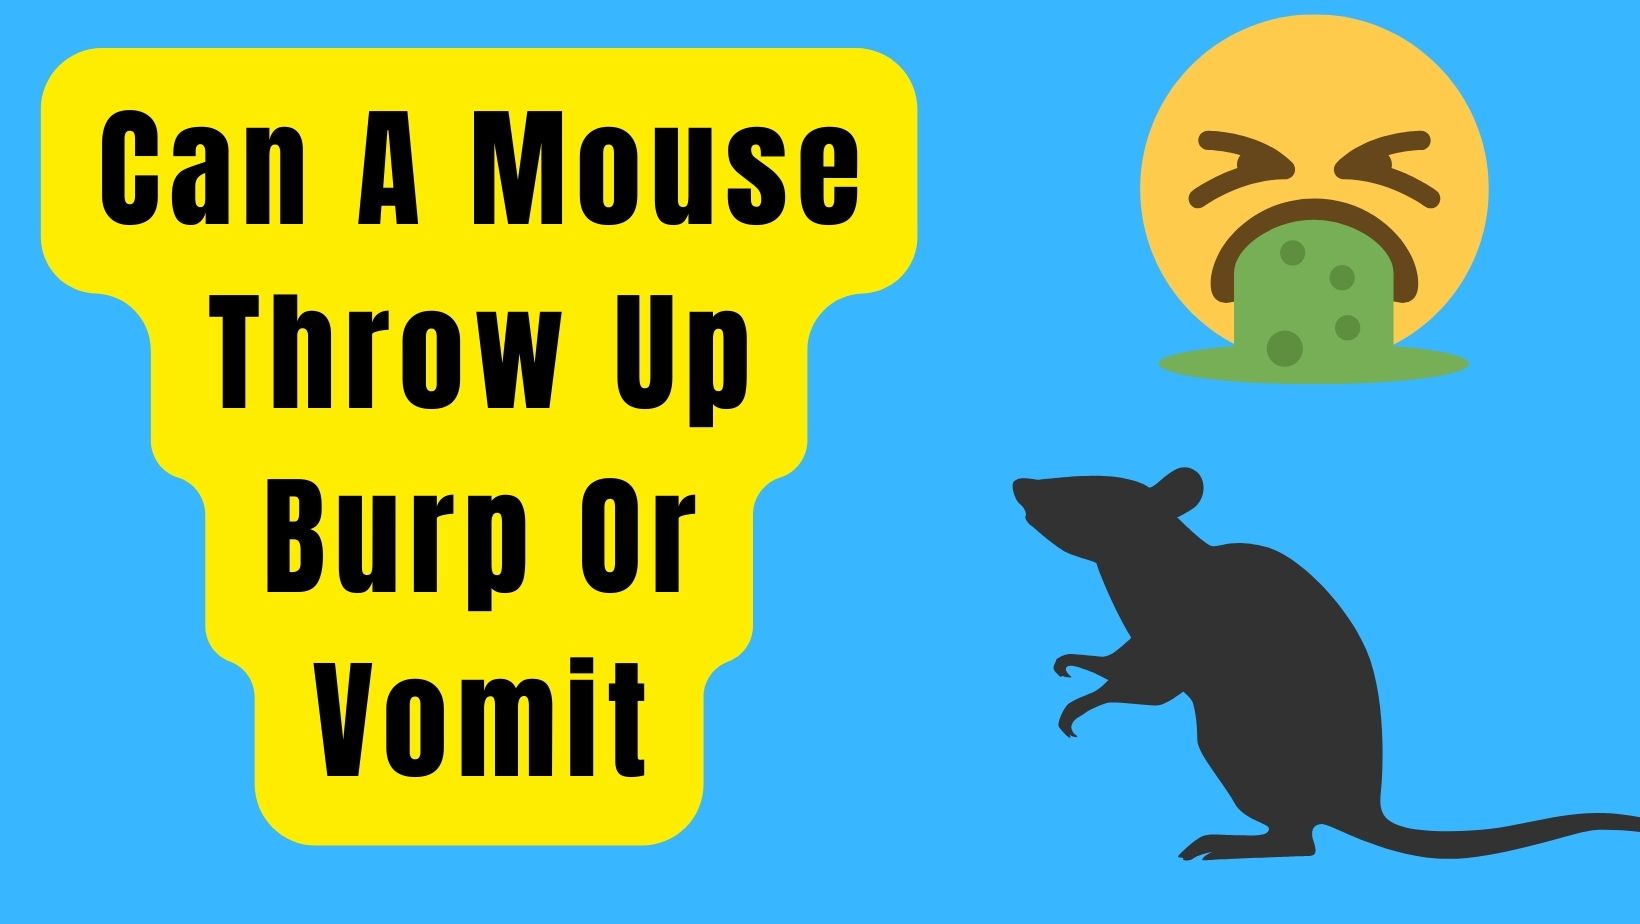 Can A Mouse Throw Up Burp Or Vomit?